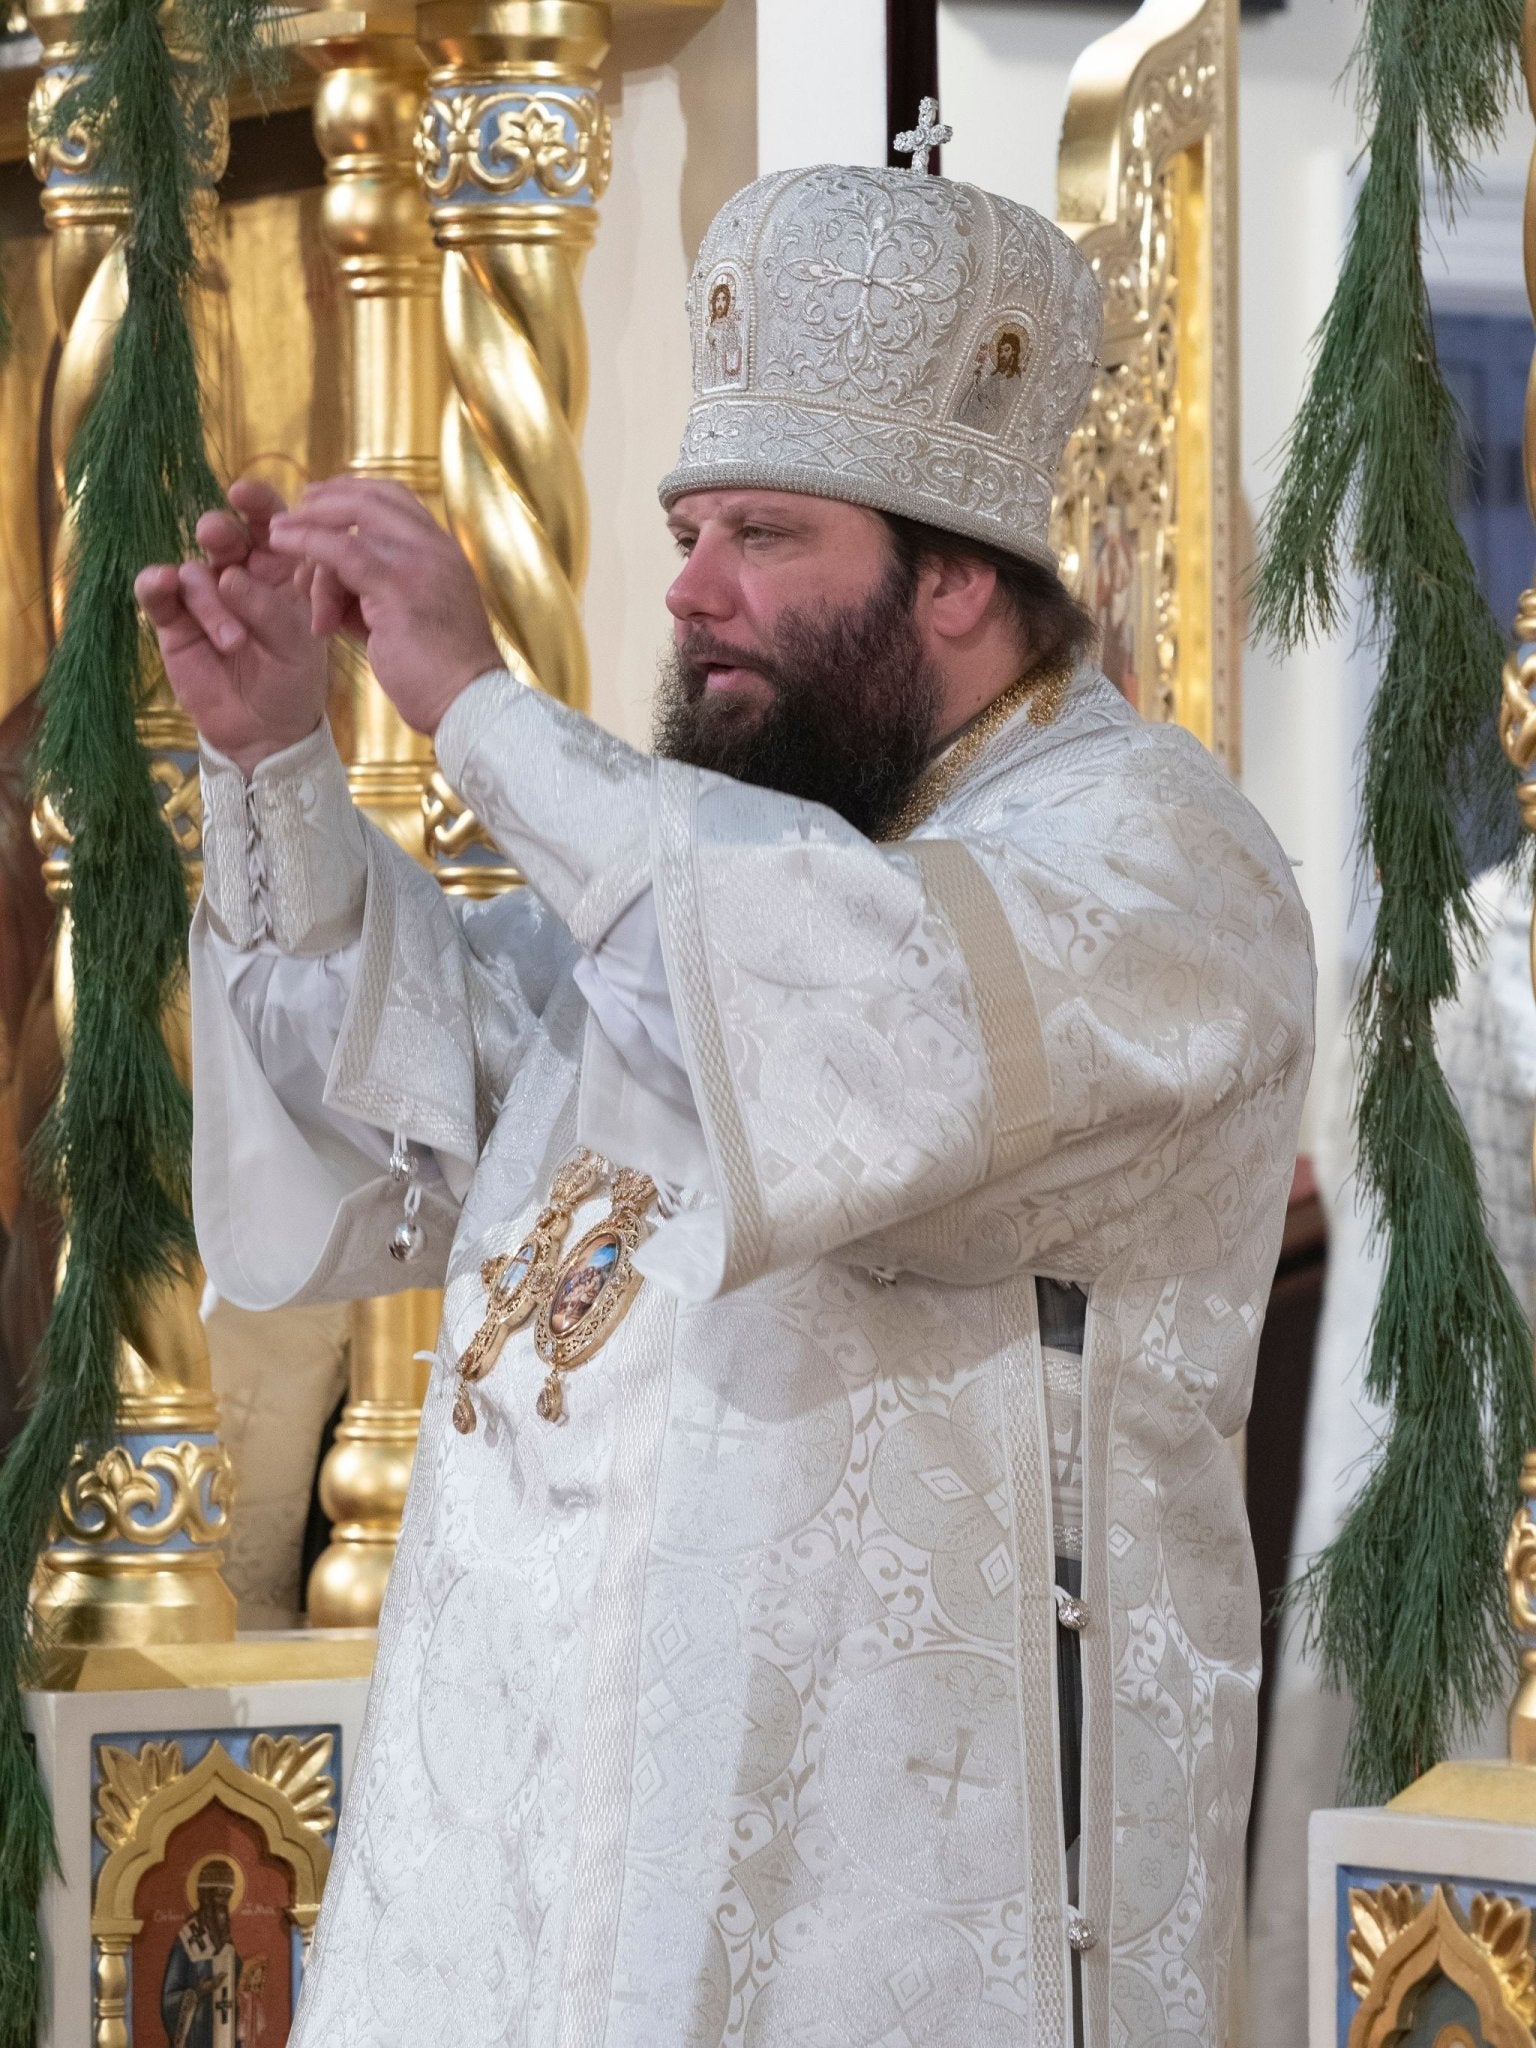 Nativity Epistle of His Eminence Nicholas, Metropolitan of Eastern America & New York, First Hierarch of the Russian Orthodox Church Outside of Russia - Holy Cross Monastery